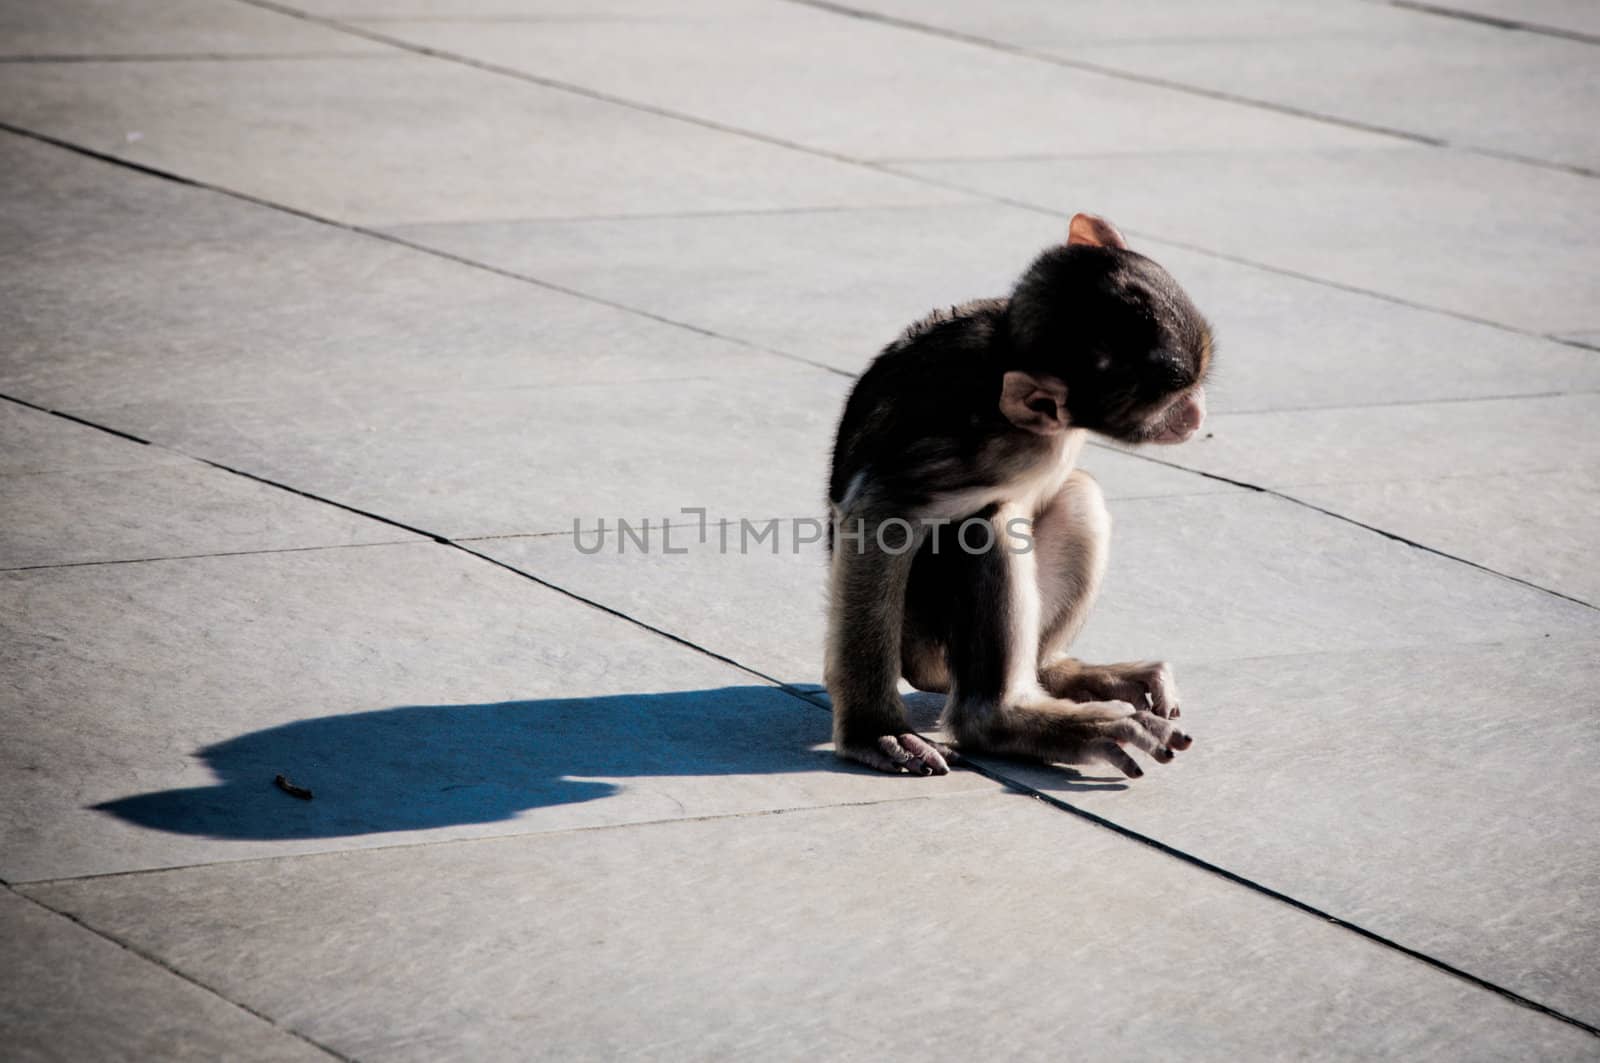 Backlit baby monkey casting long shadow sitting on wooden planking.